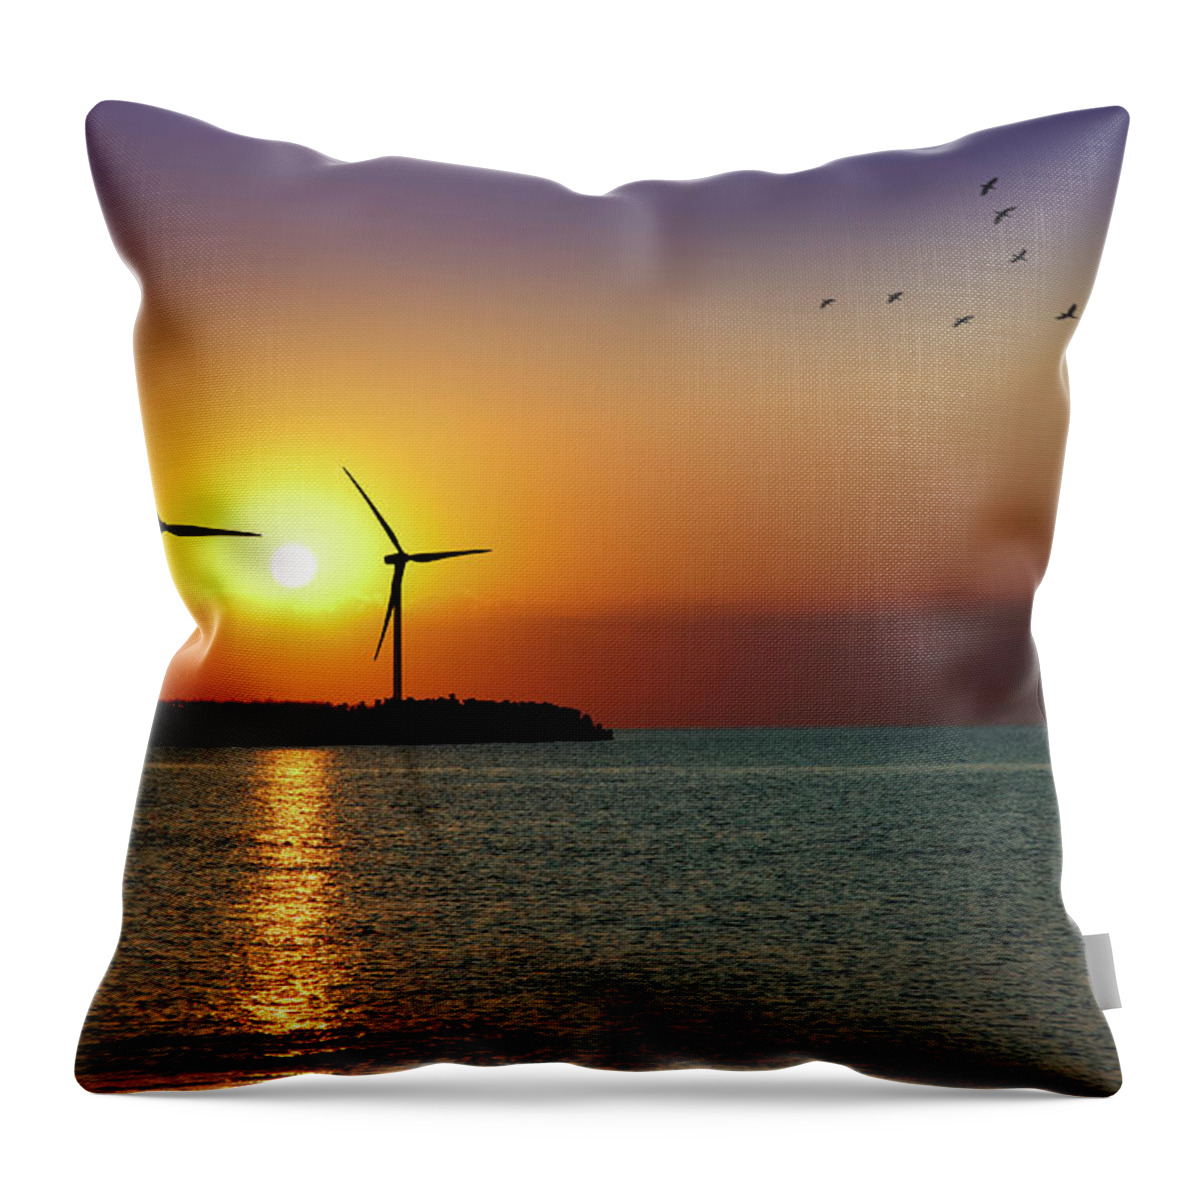 Water's Edge Throw Pillow featuring the photograph Wind Turbine Farm In Sunset by Mariusfm77